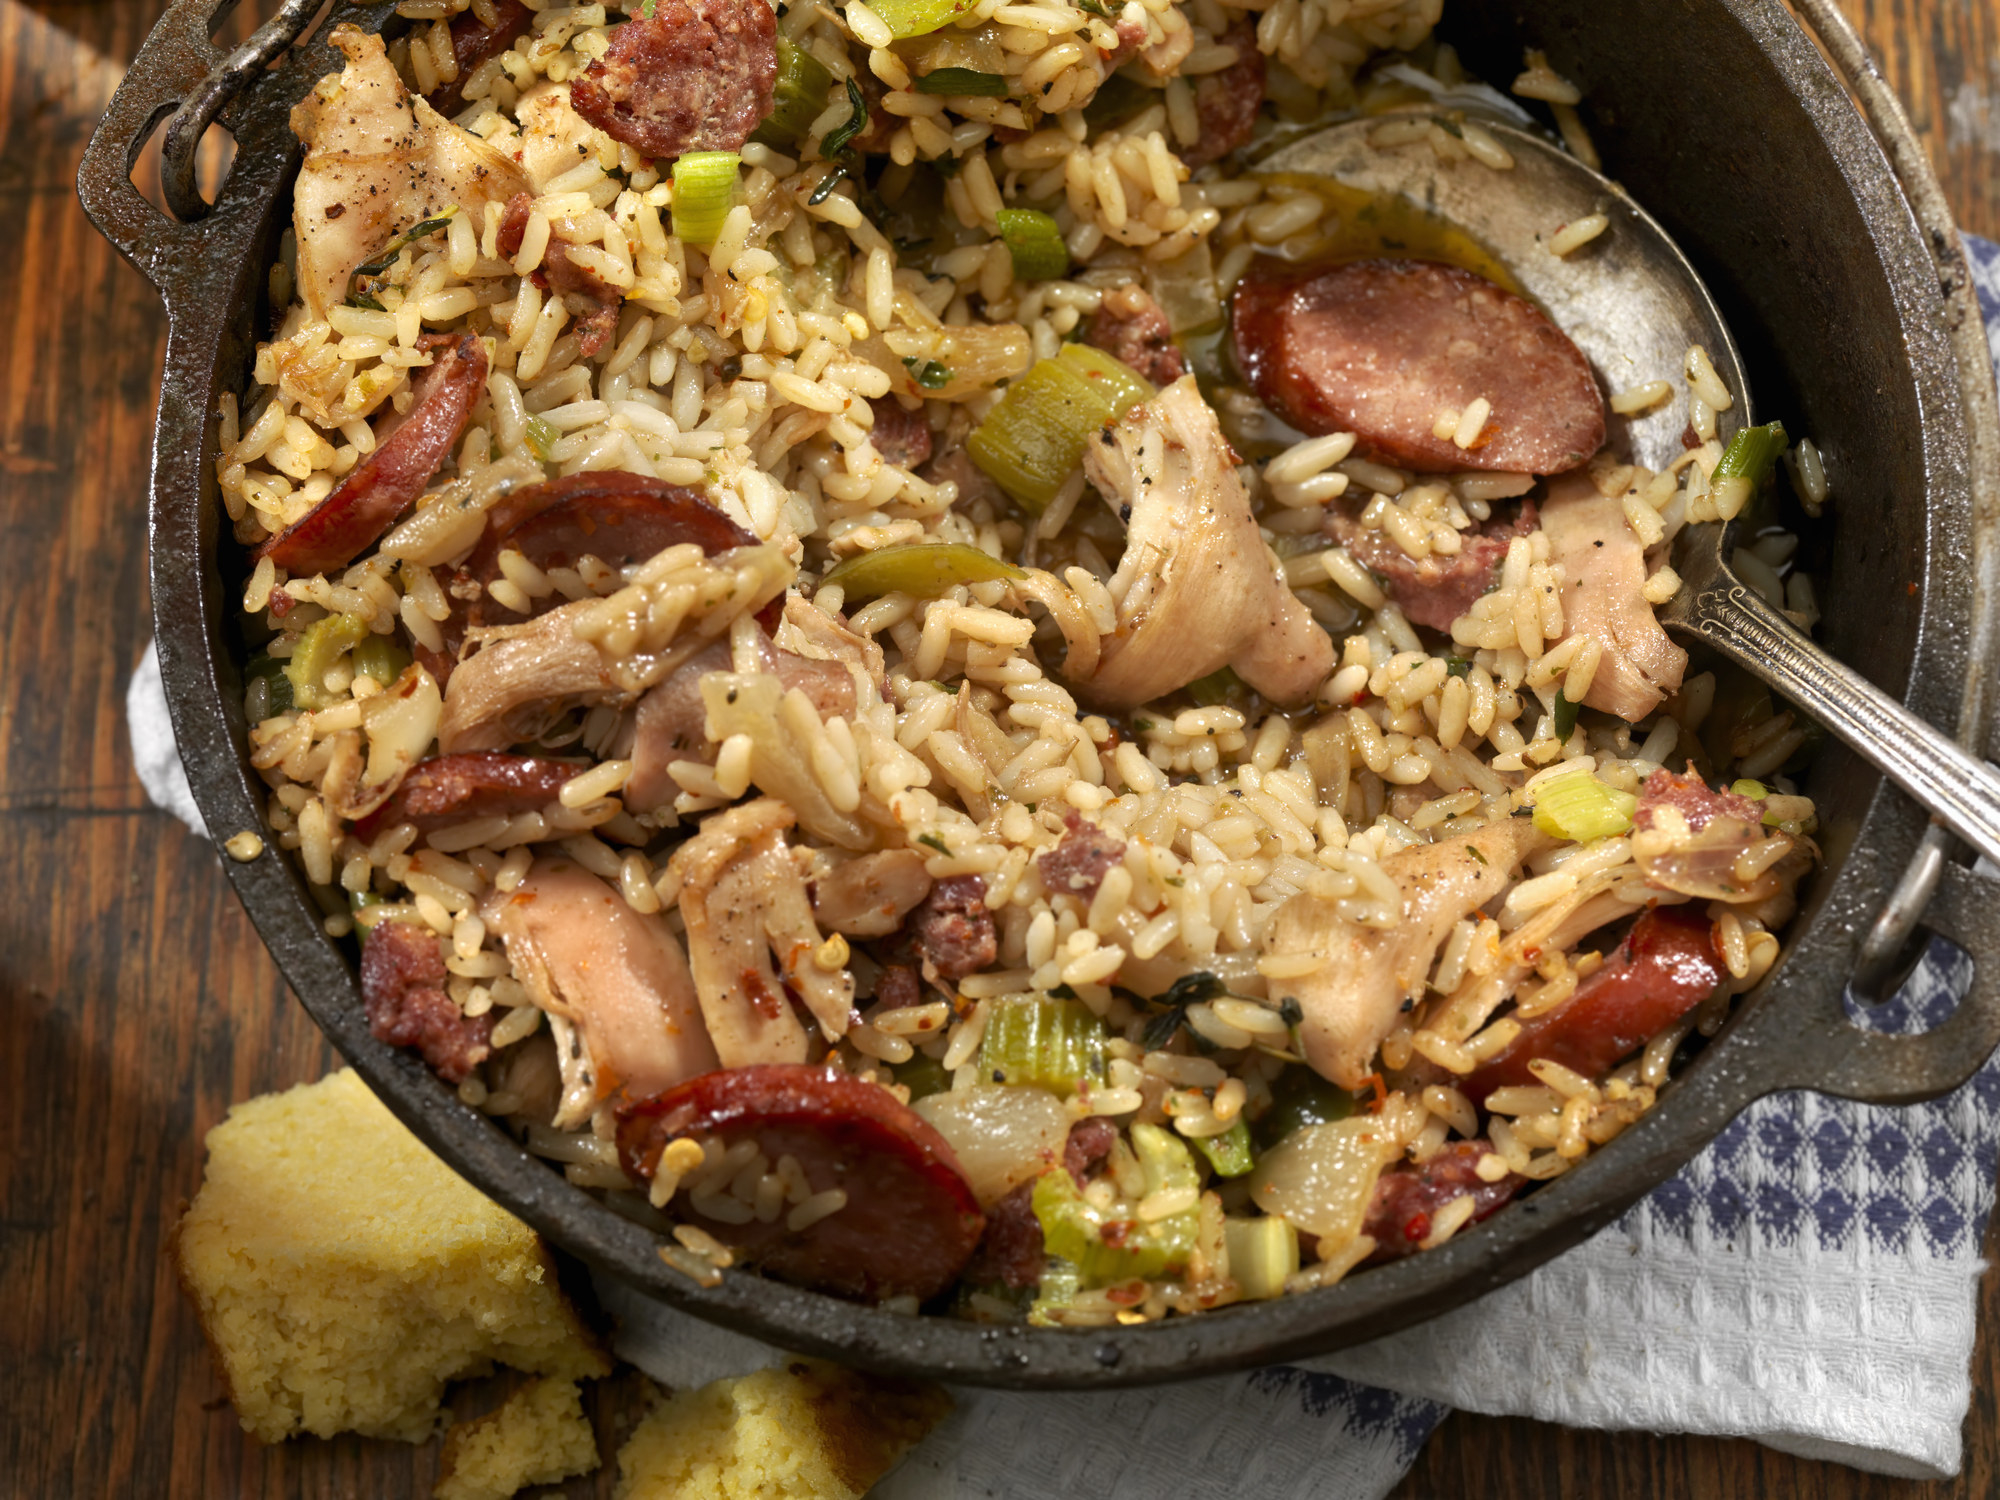 A sausage and pepper skillet.